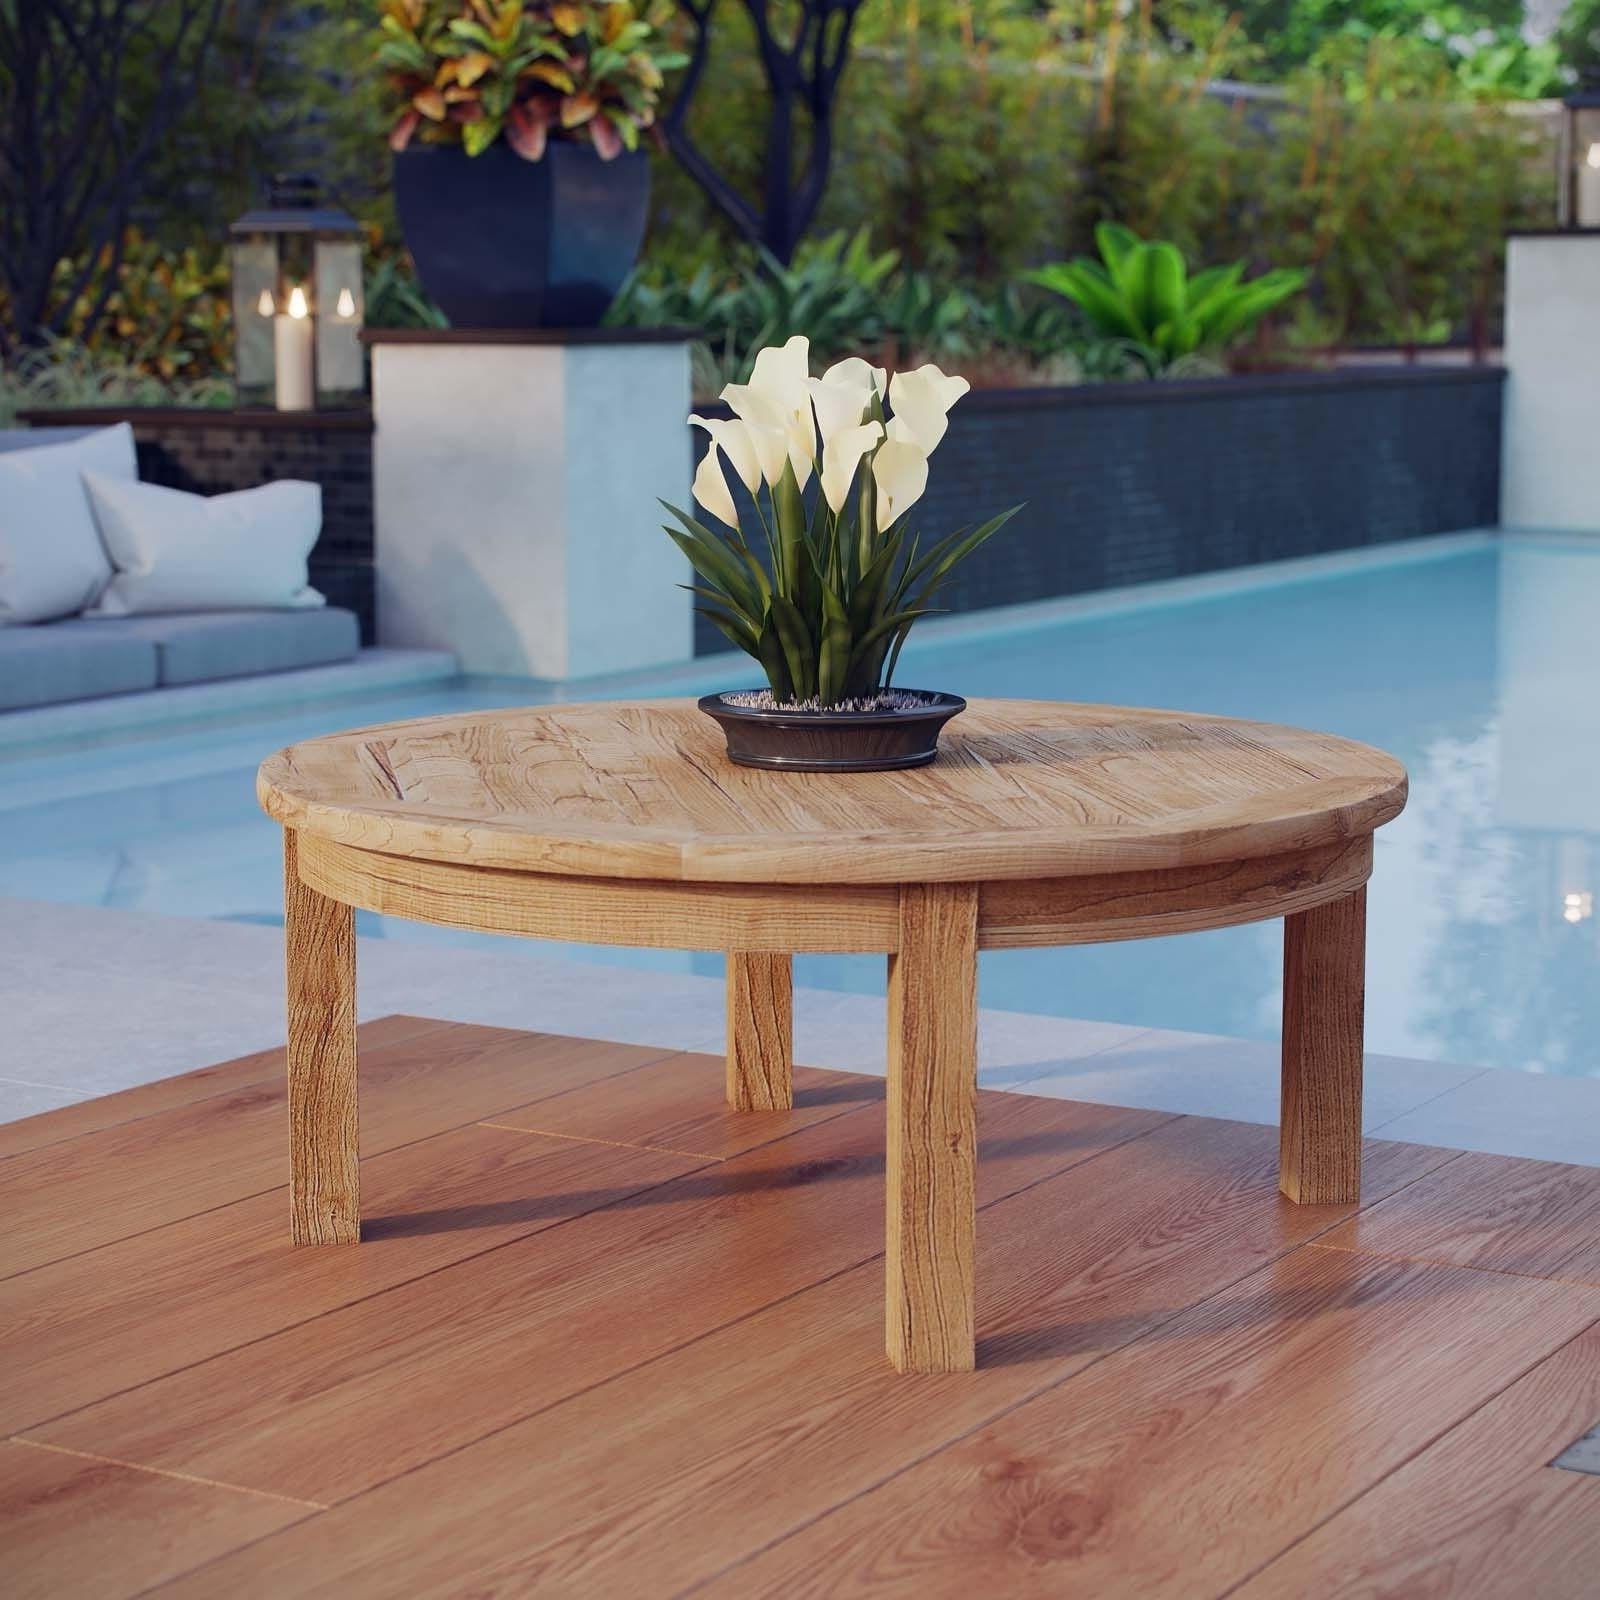 Shop Modway Pier Natural Teak Modern Outdoor Round Patio Coffee Table Pertaining To Modern Outdoor Patio Coffee Tables (View 4 of 20)